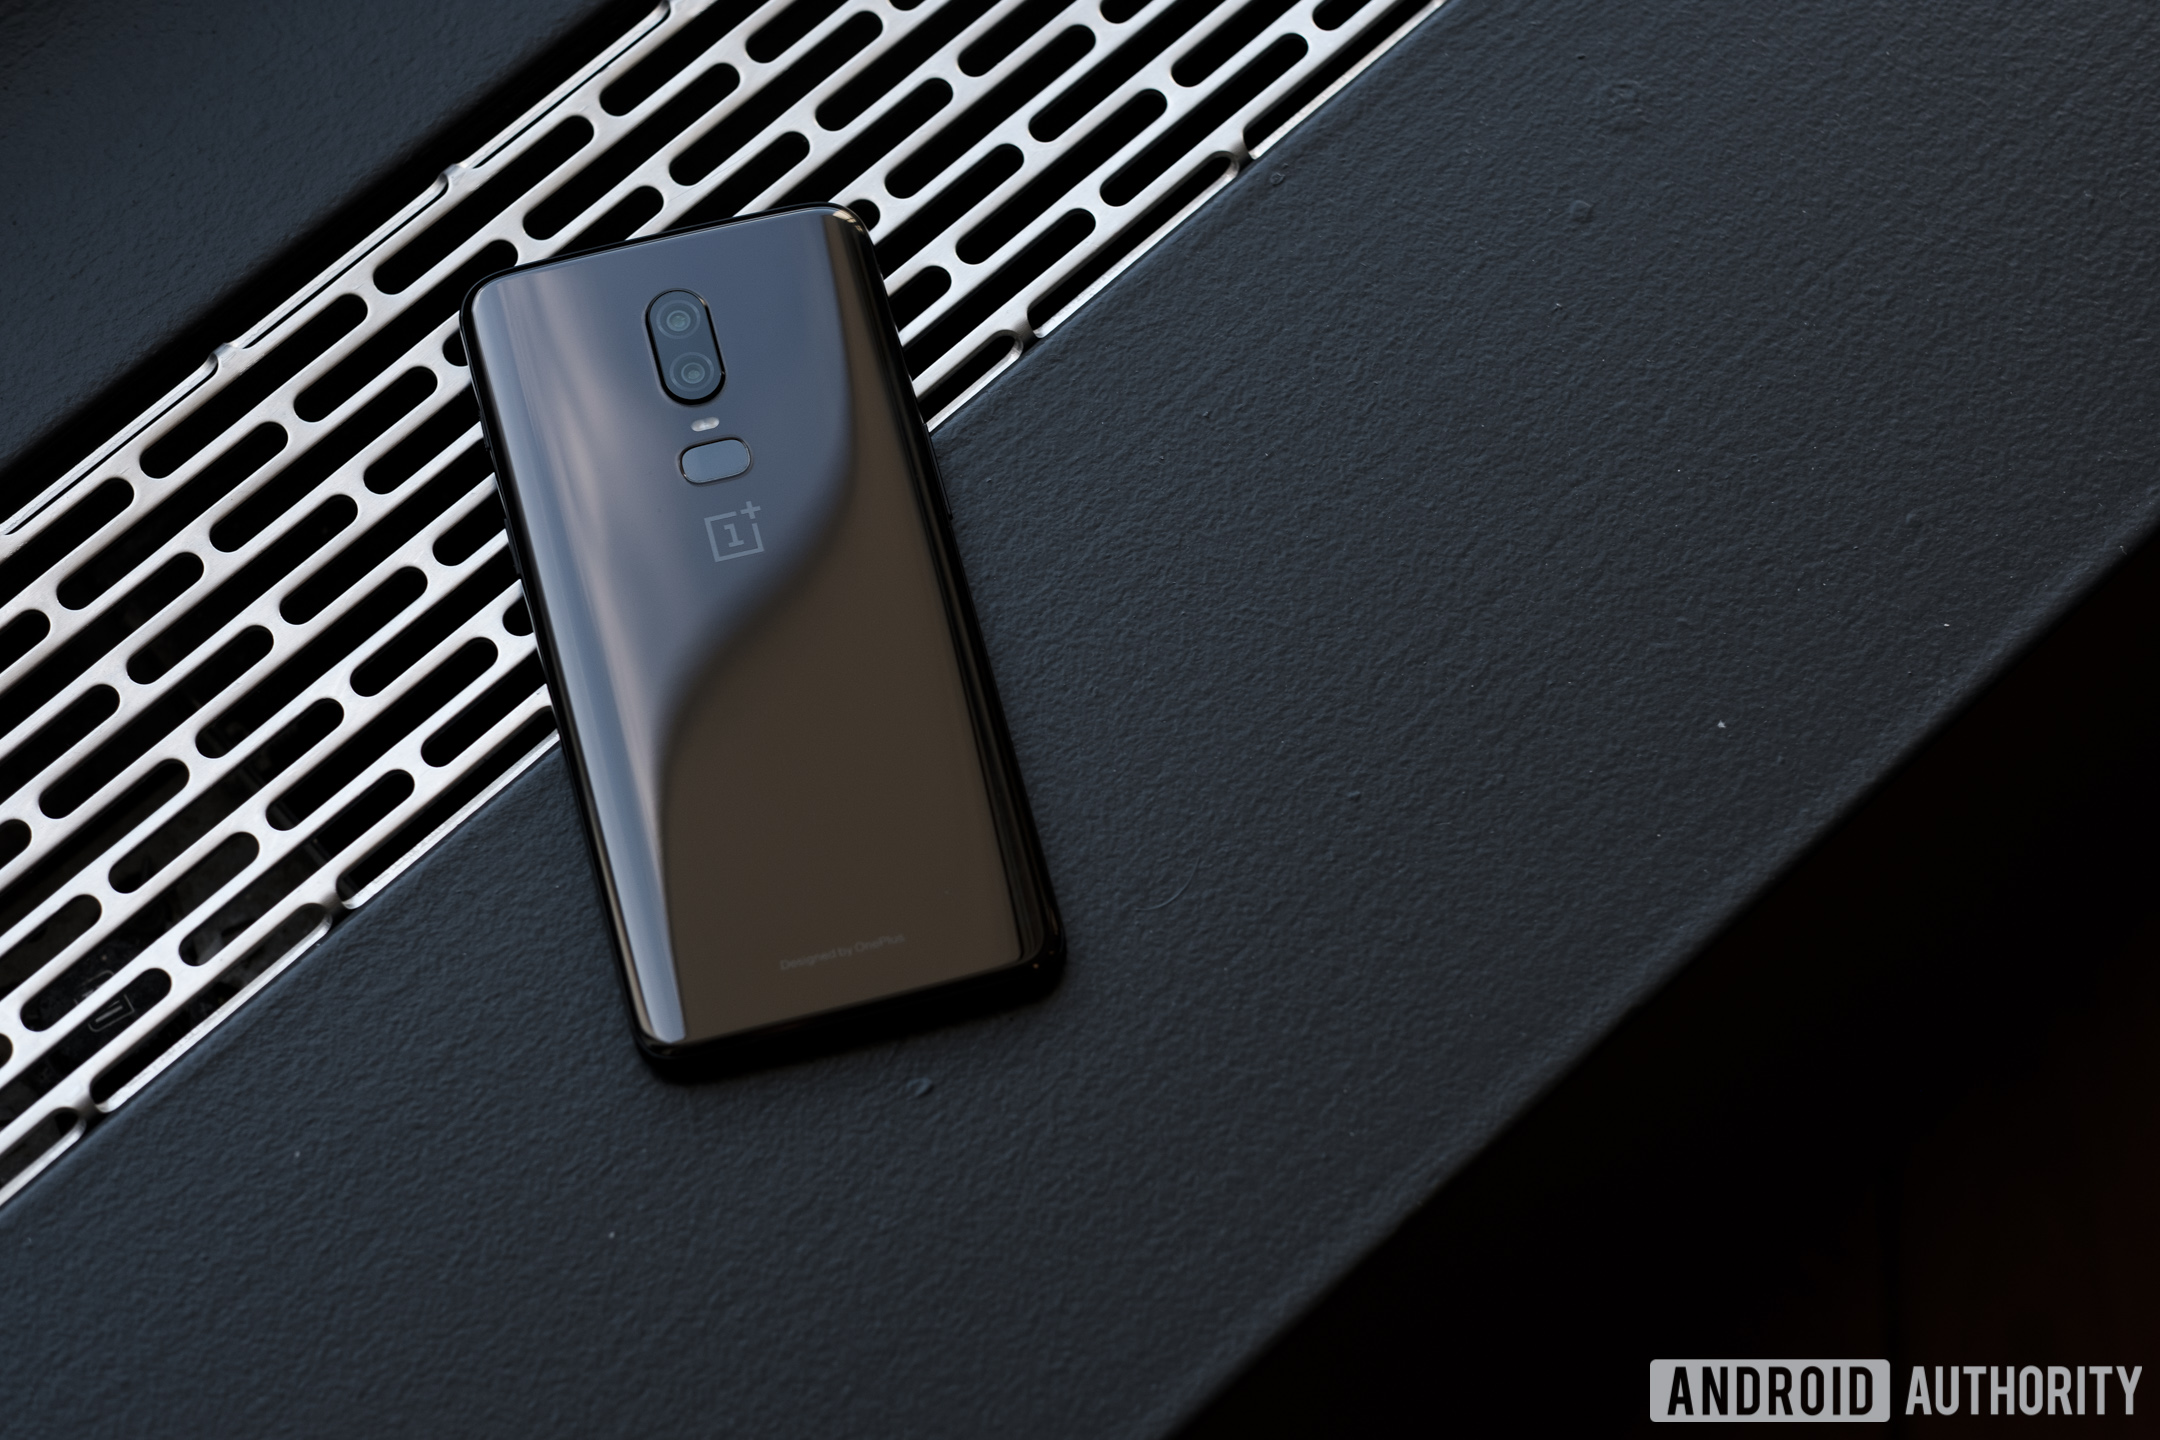 oneplus 6 problems - only option is to wait for a software update